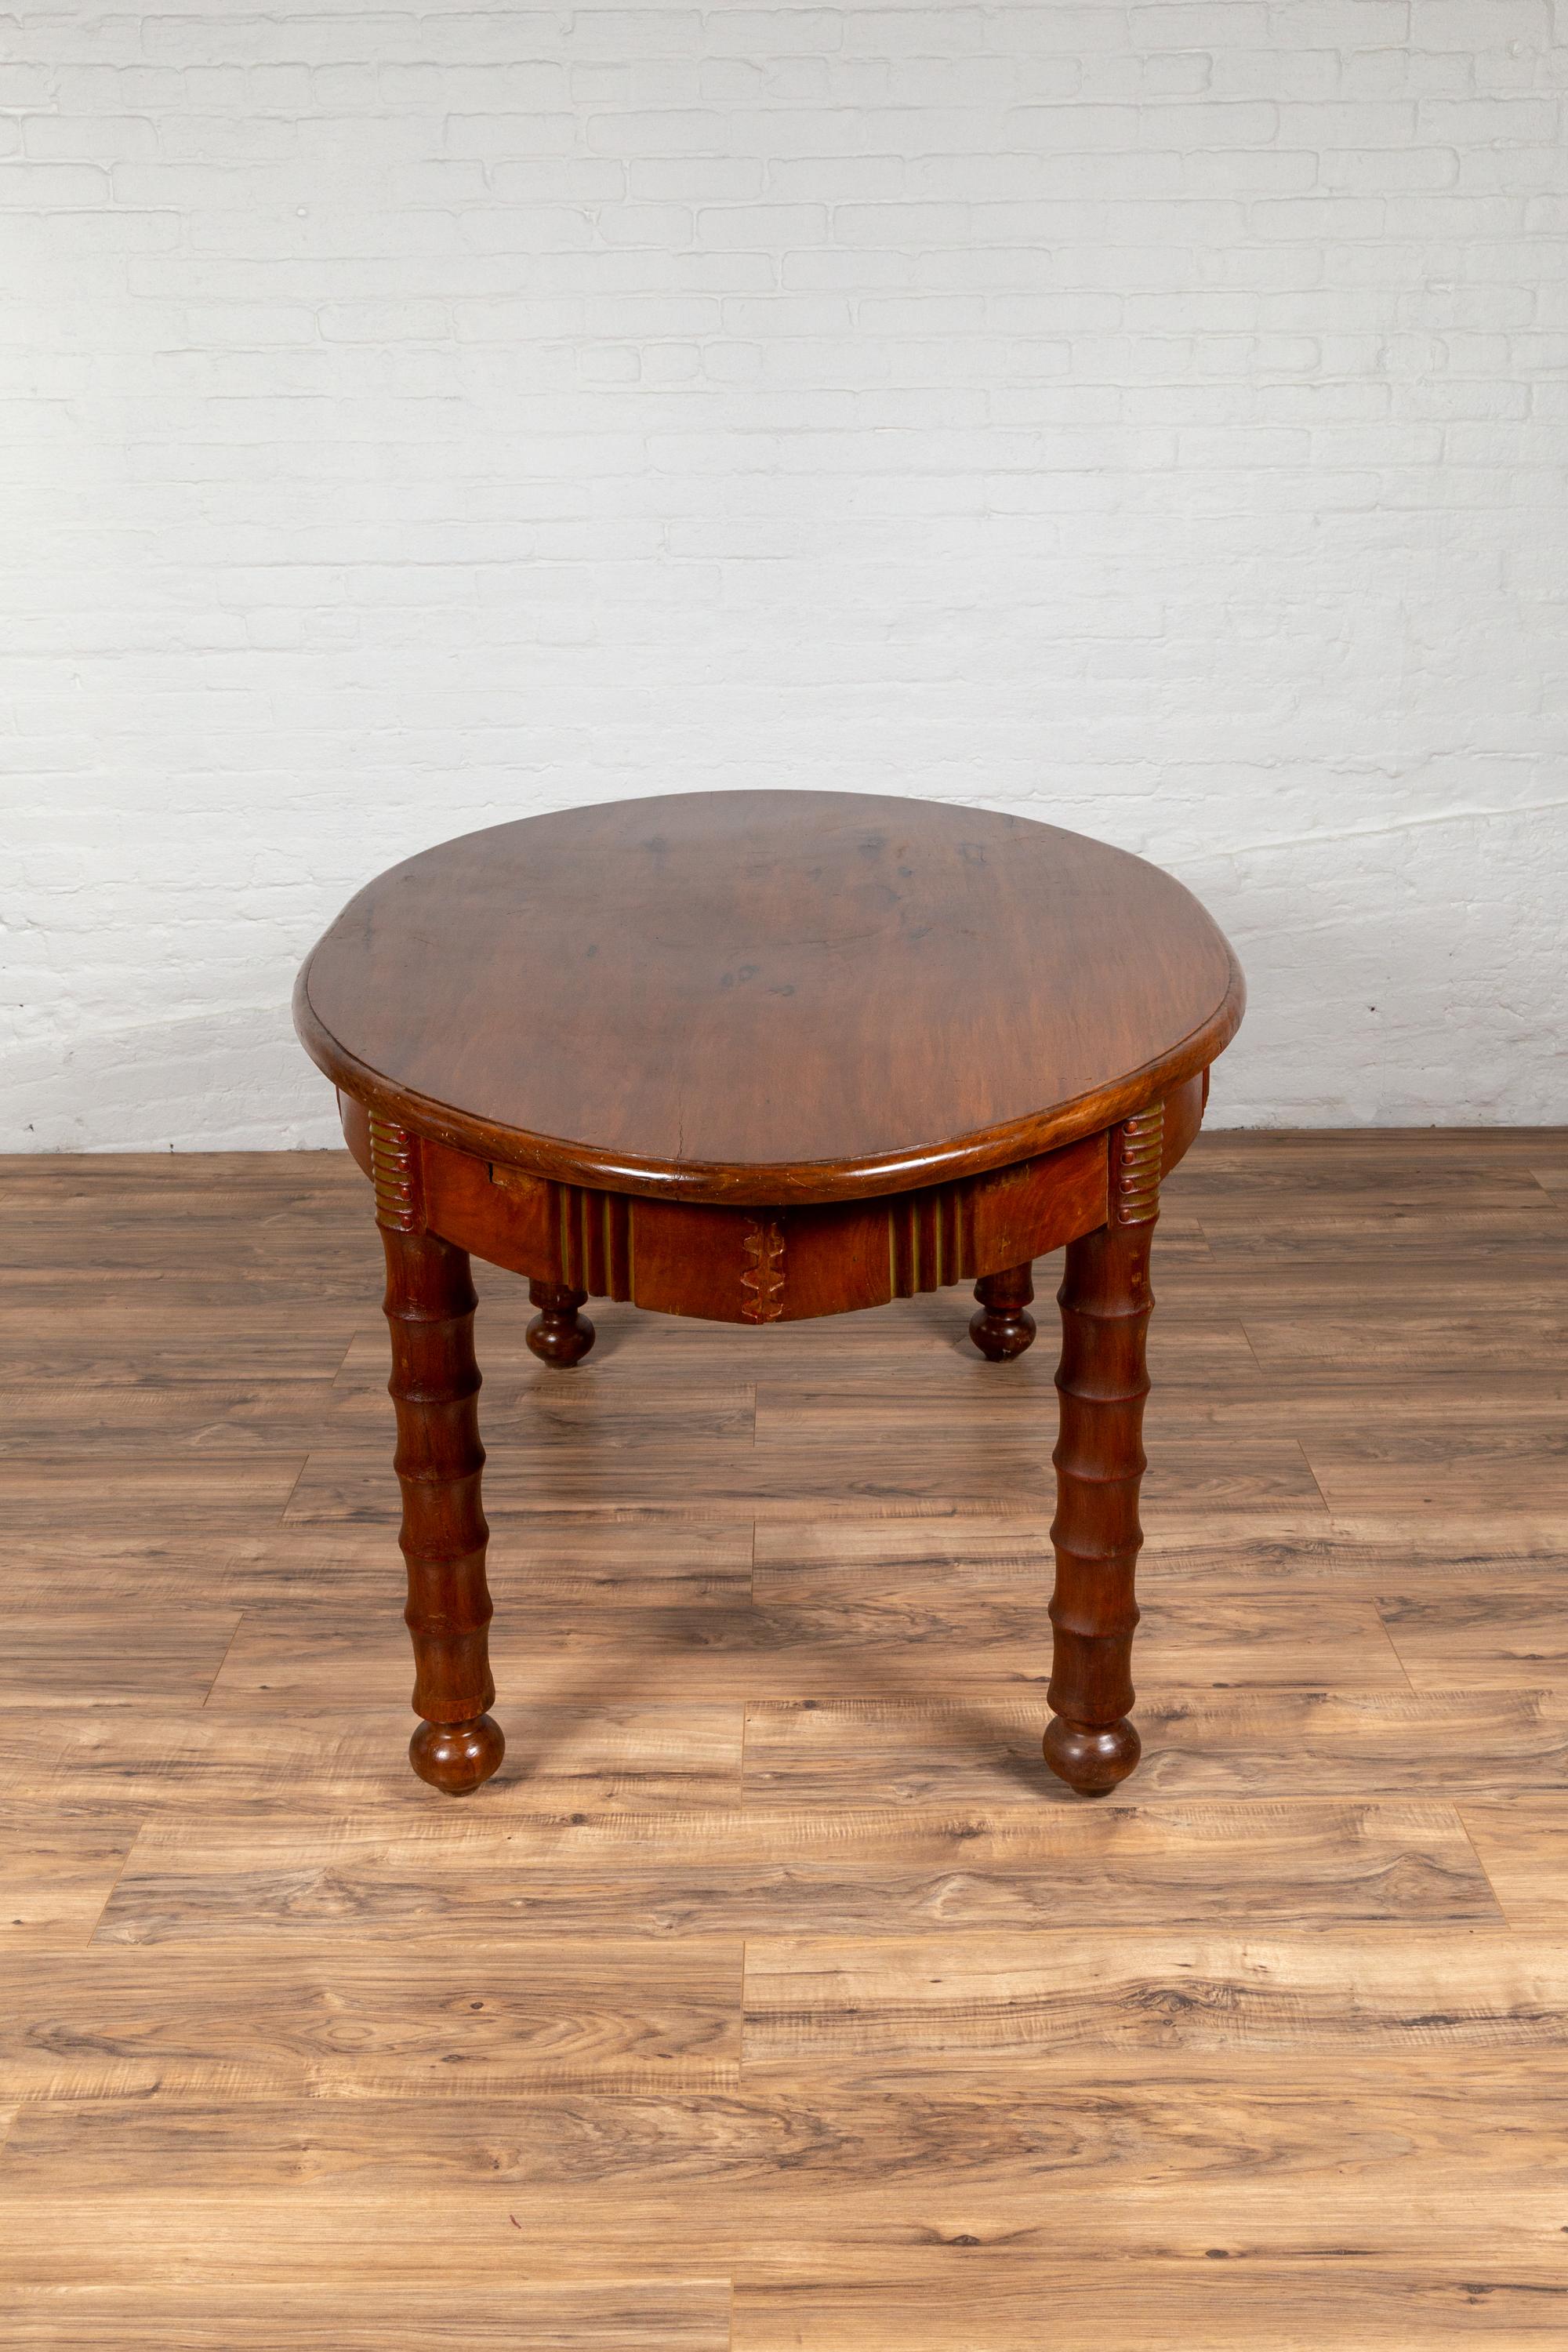 Antique Oval Dining Room Table from Indonesia with Spindle Legs and Warm Patina For Sale 9